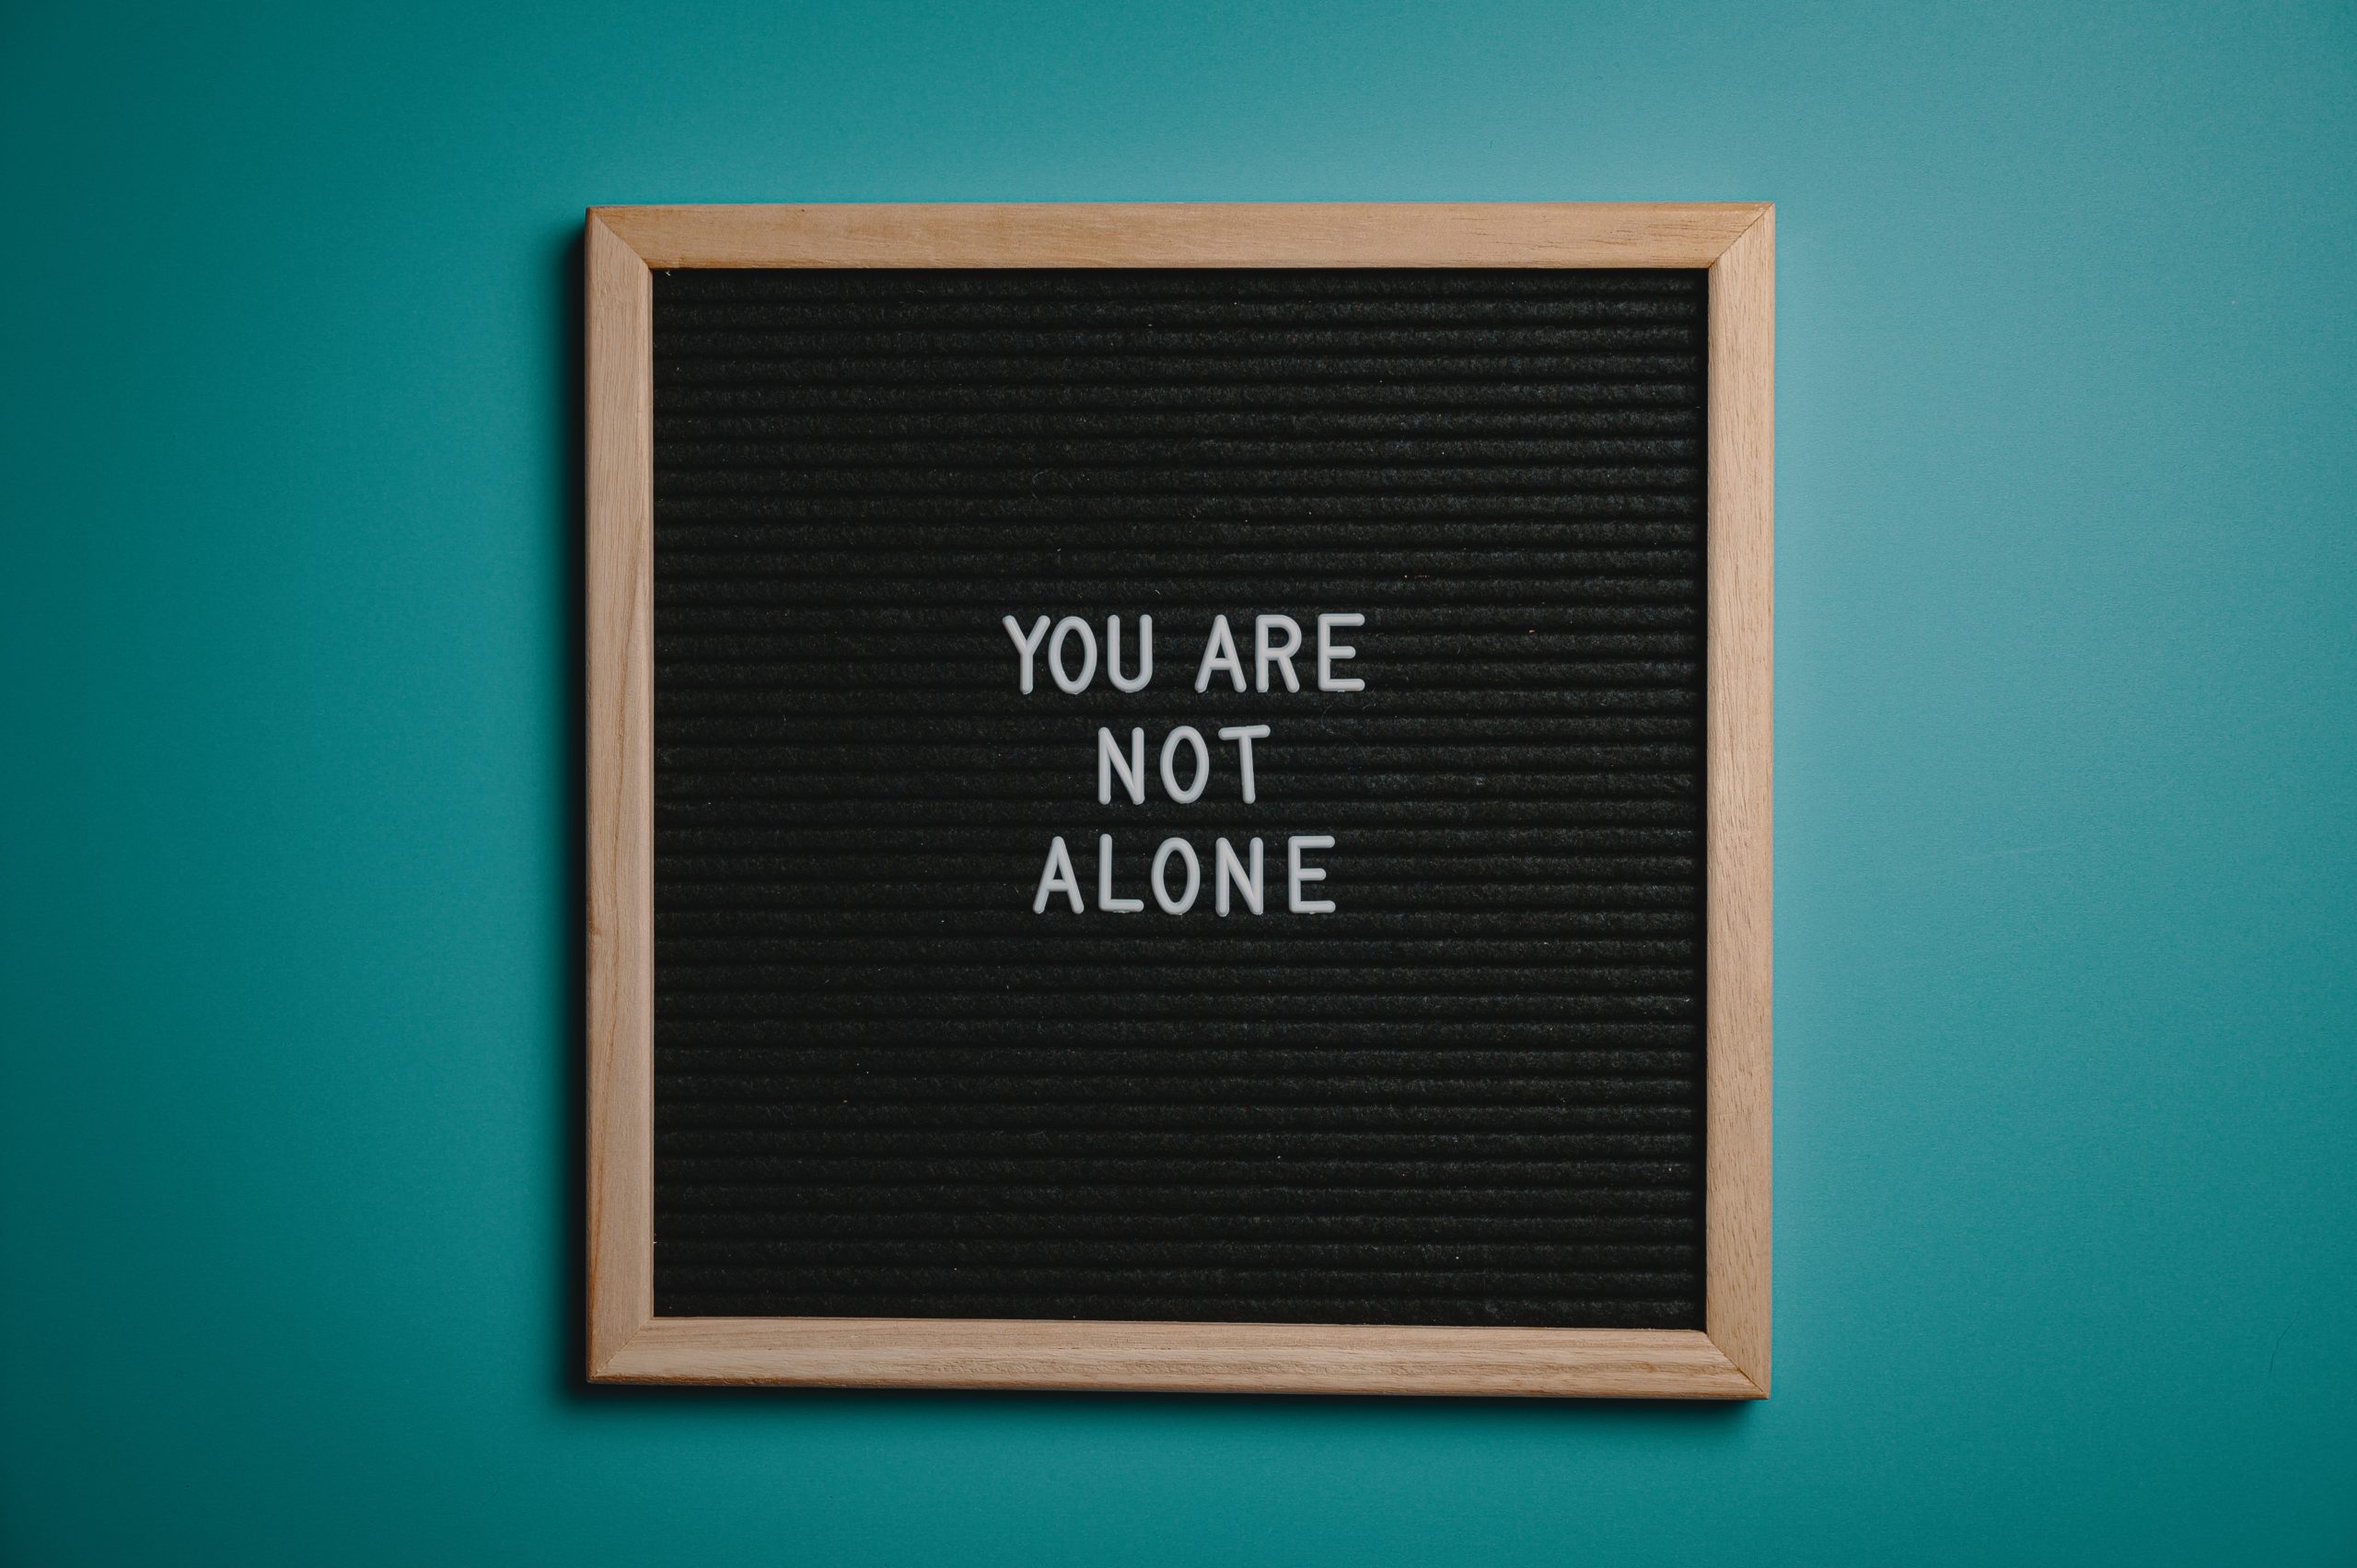 you-are-not-alone-quote-board-on-brown-wooden-frame-2821220